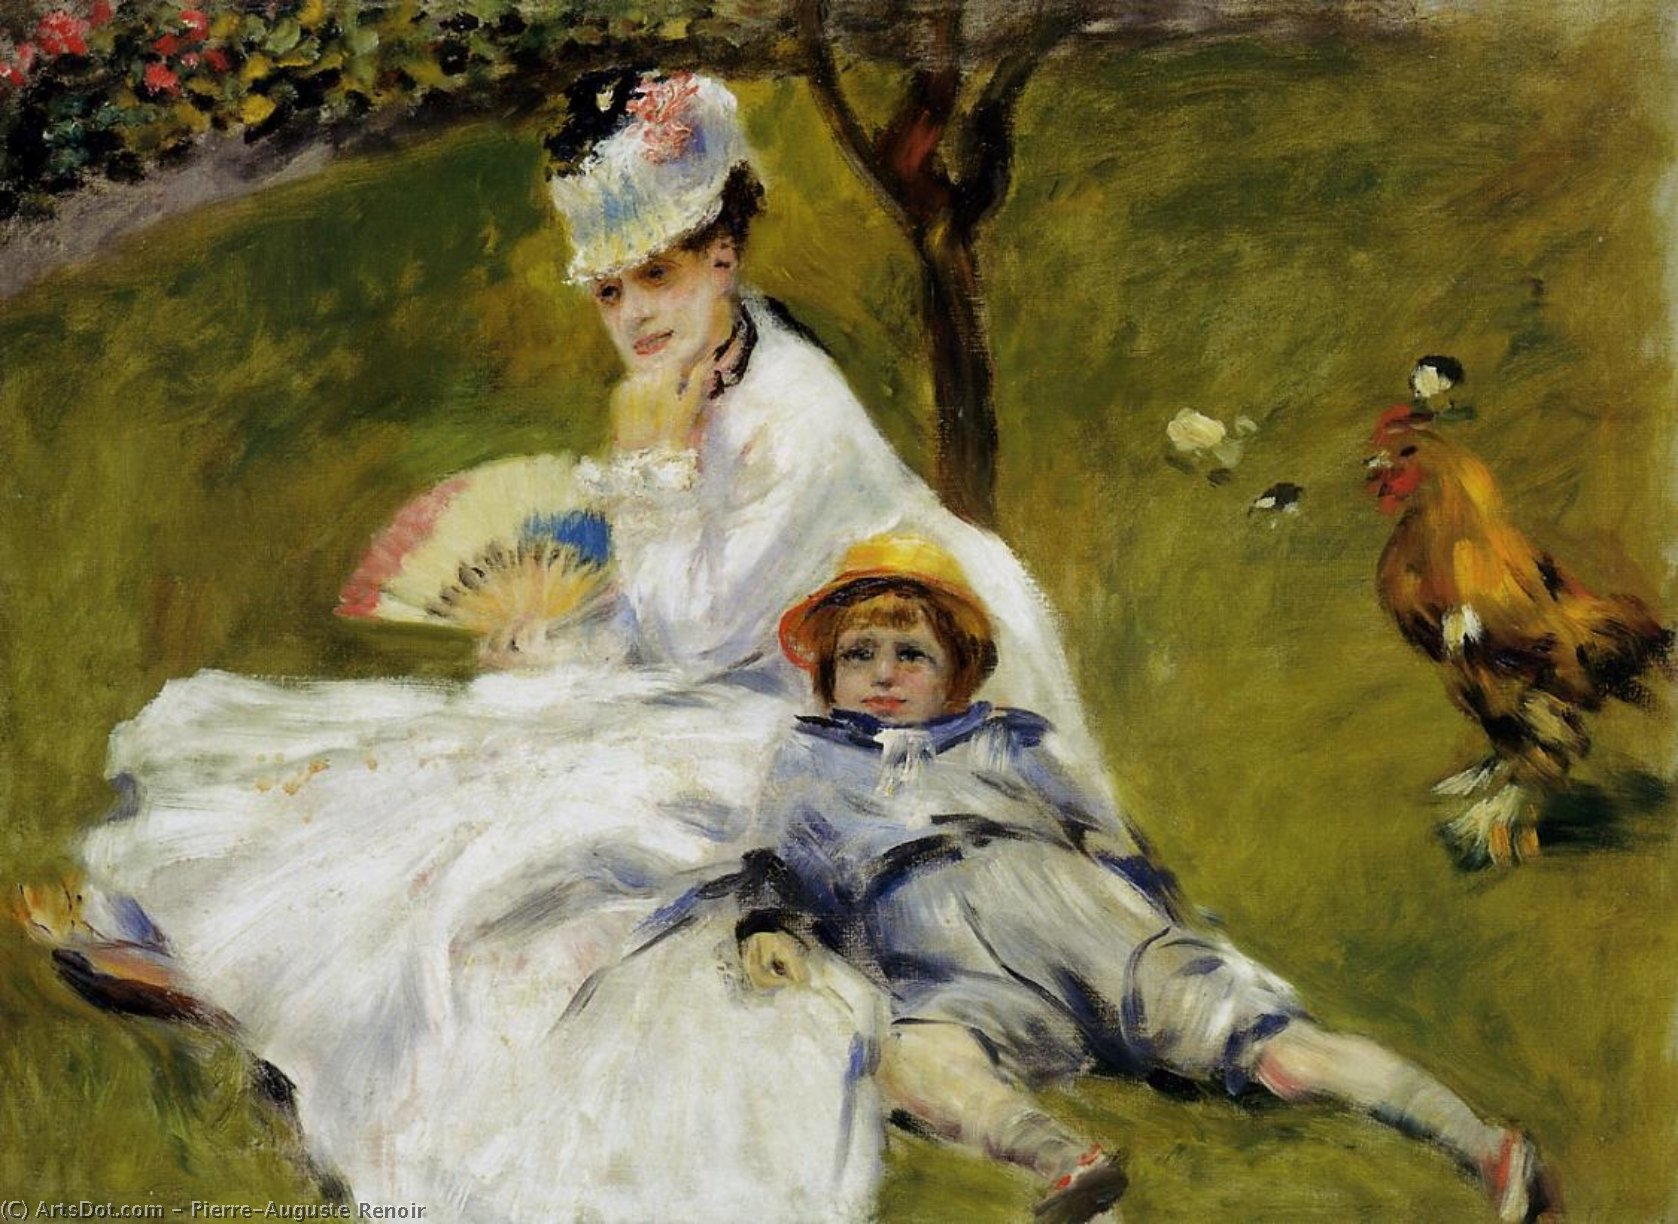 Order Oil Painting Replica Camille Monet and Her Son Jean in the Garden at Argenteuil, 1874 by Pierre-Auguste Renoir (1841-1919, France) | ArtsDot.com